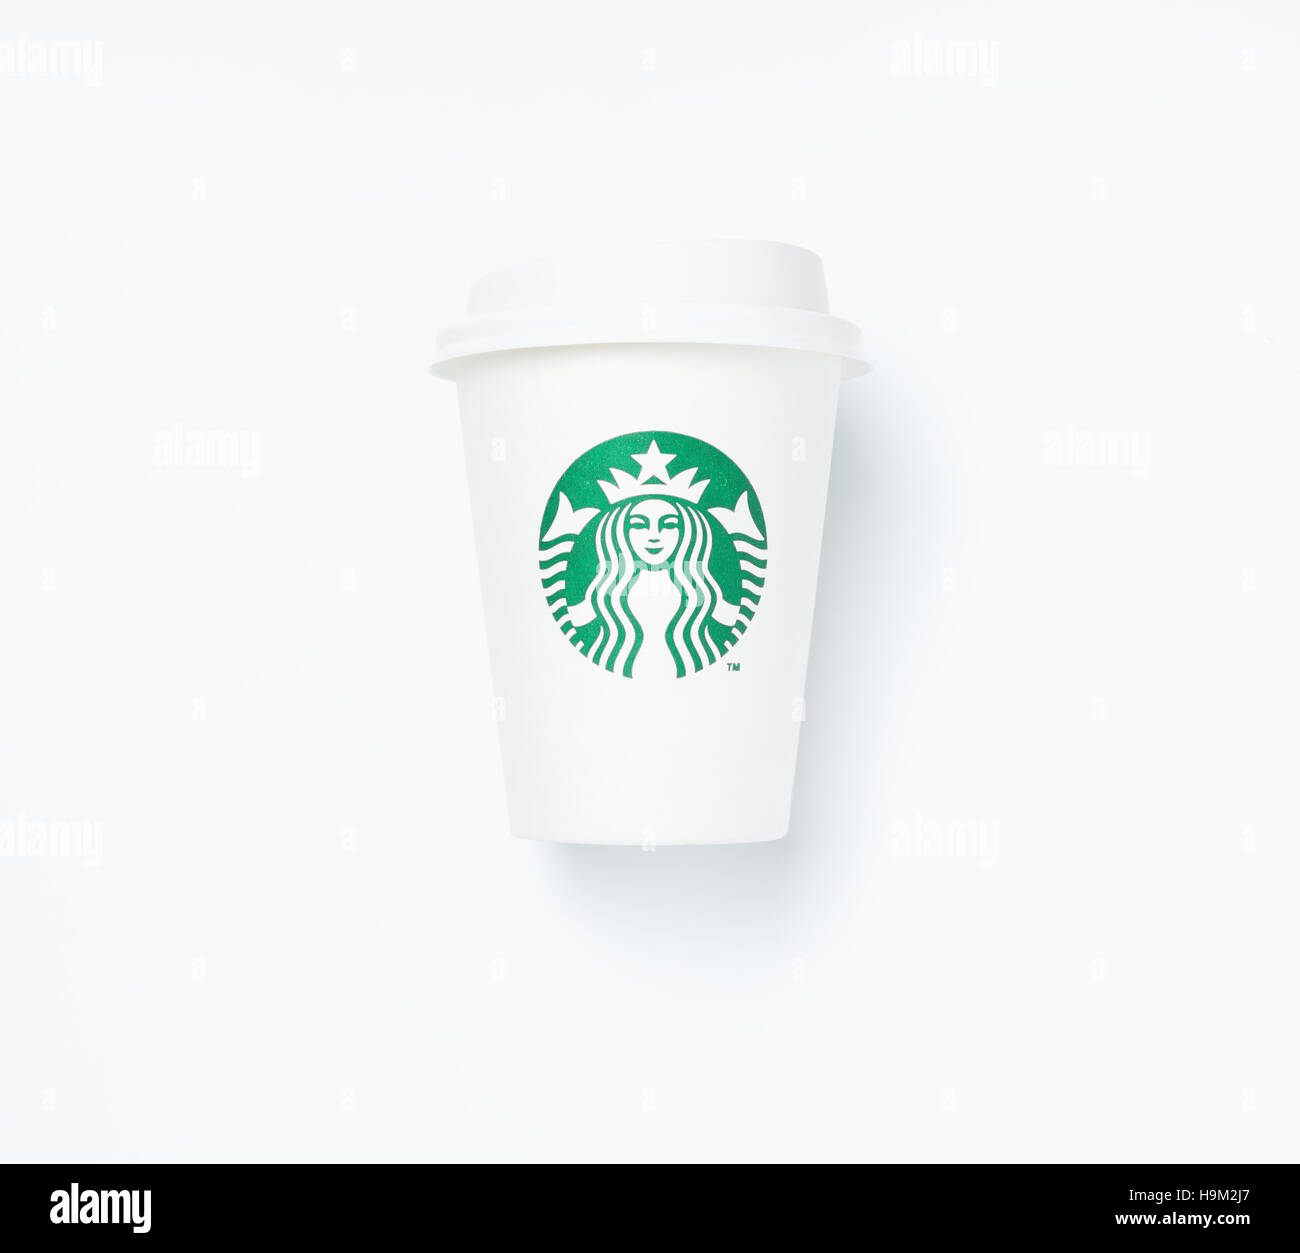 Bangkok, Thailand - September 17, 2016 : Cup of Starbucks coffee with new logo isolated on white background Stock Photo